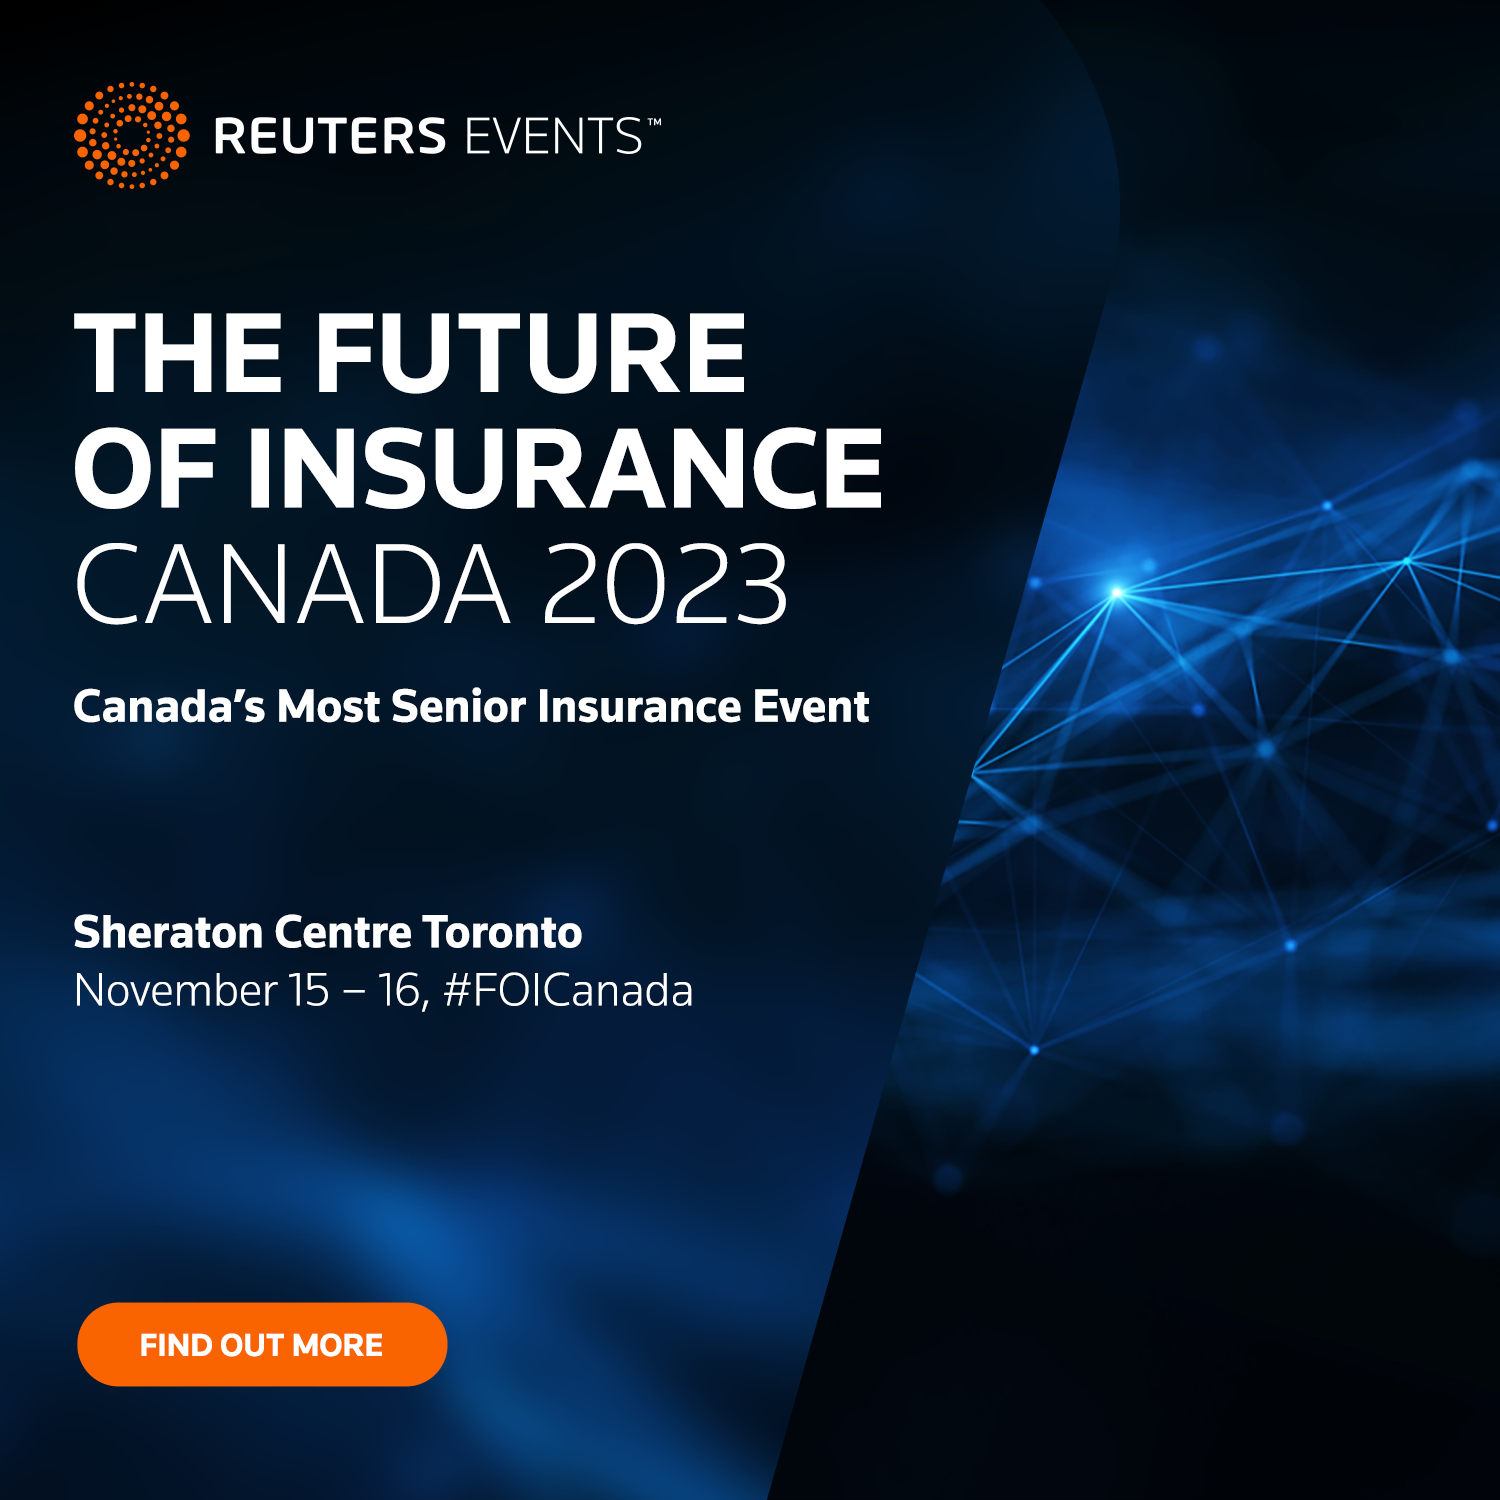 Reuters: The Future of Insurance Canada 2023  organized by Reuters Events